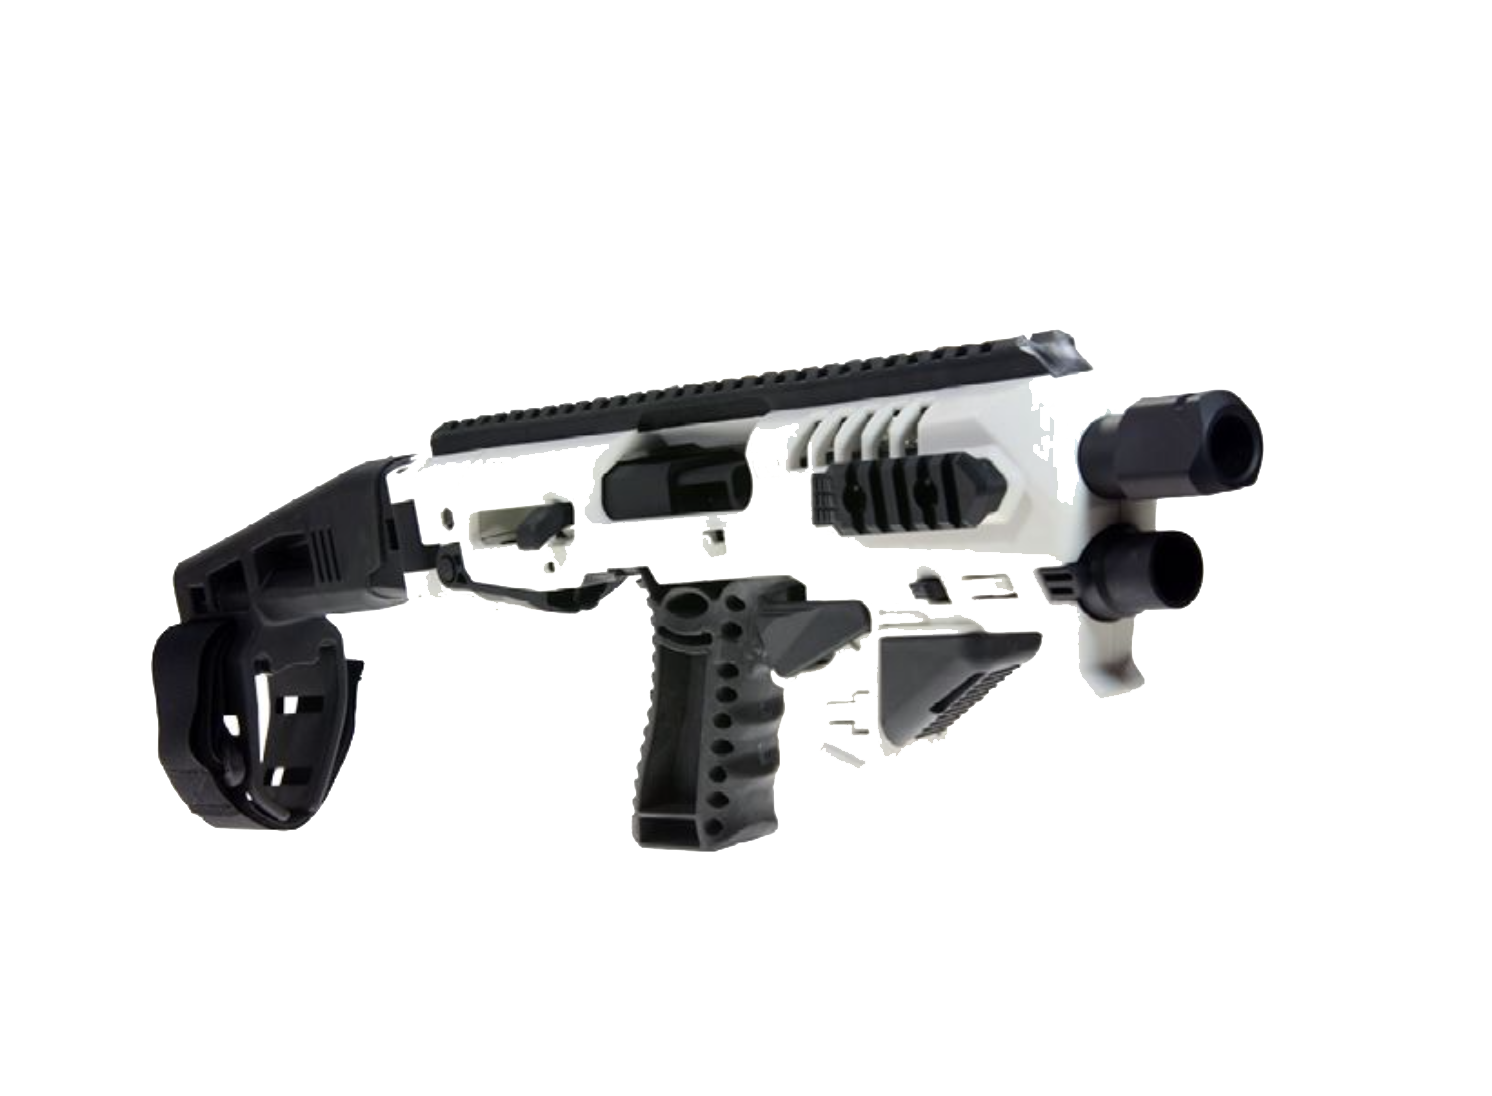 CAA - WHITE Micro RONI Gen 4X: NAKED System for Glock 17&19 * Free Thumb Rest *